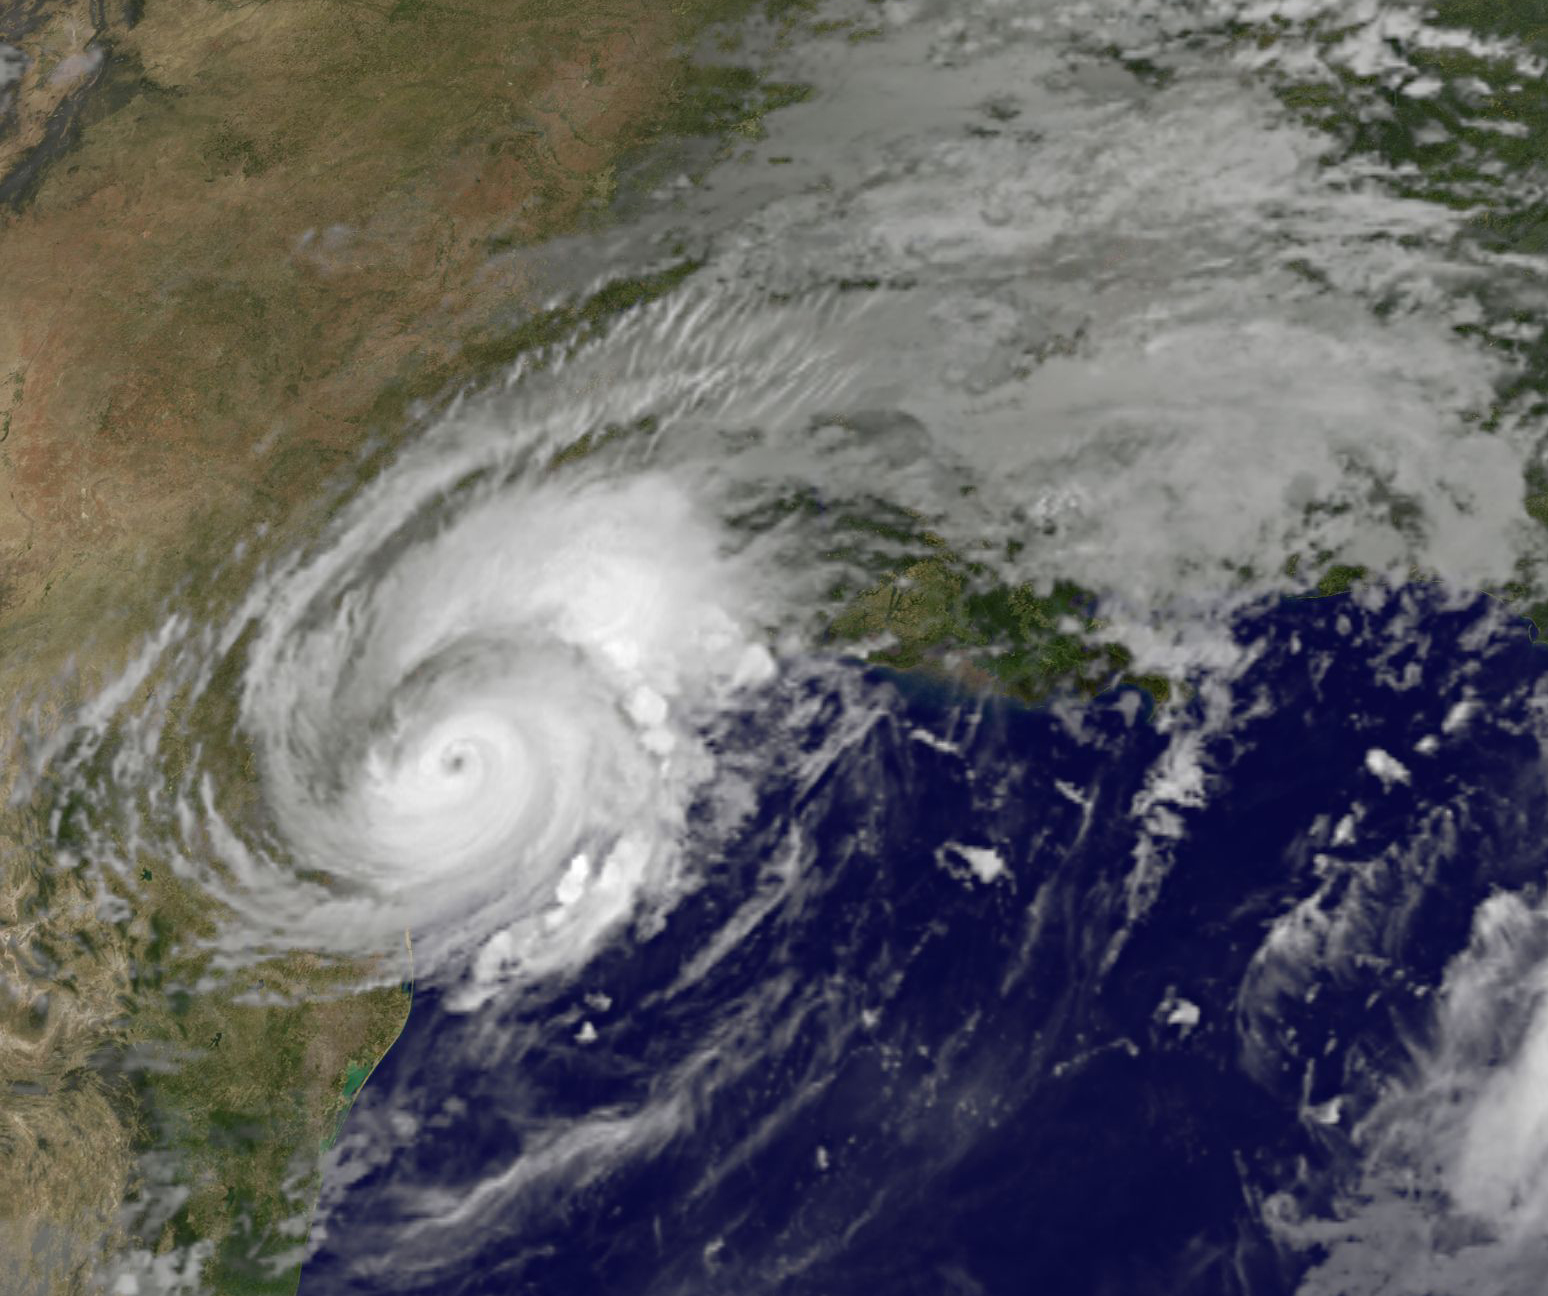 Satellite image of Harvey, a swirling cloud mass along the eastern coast of Texas.